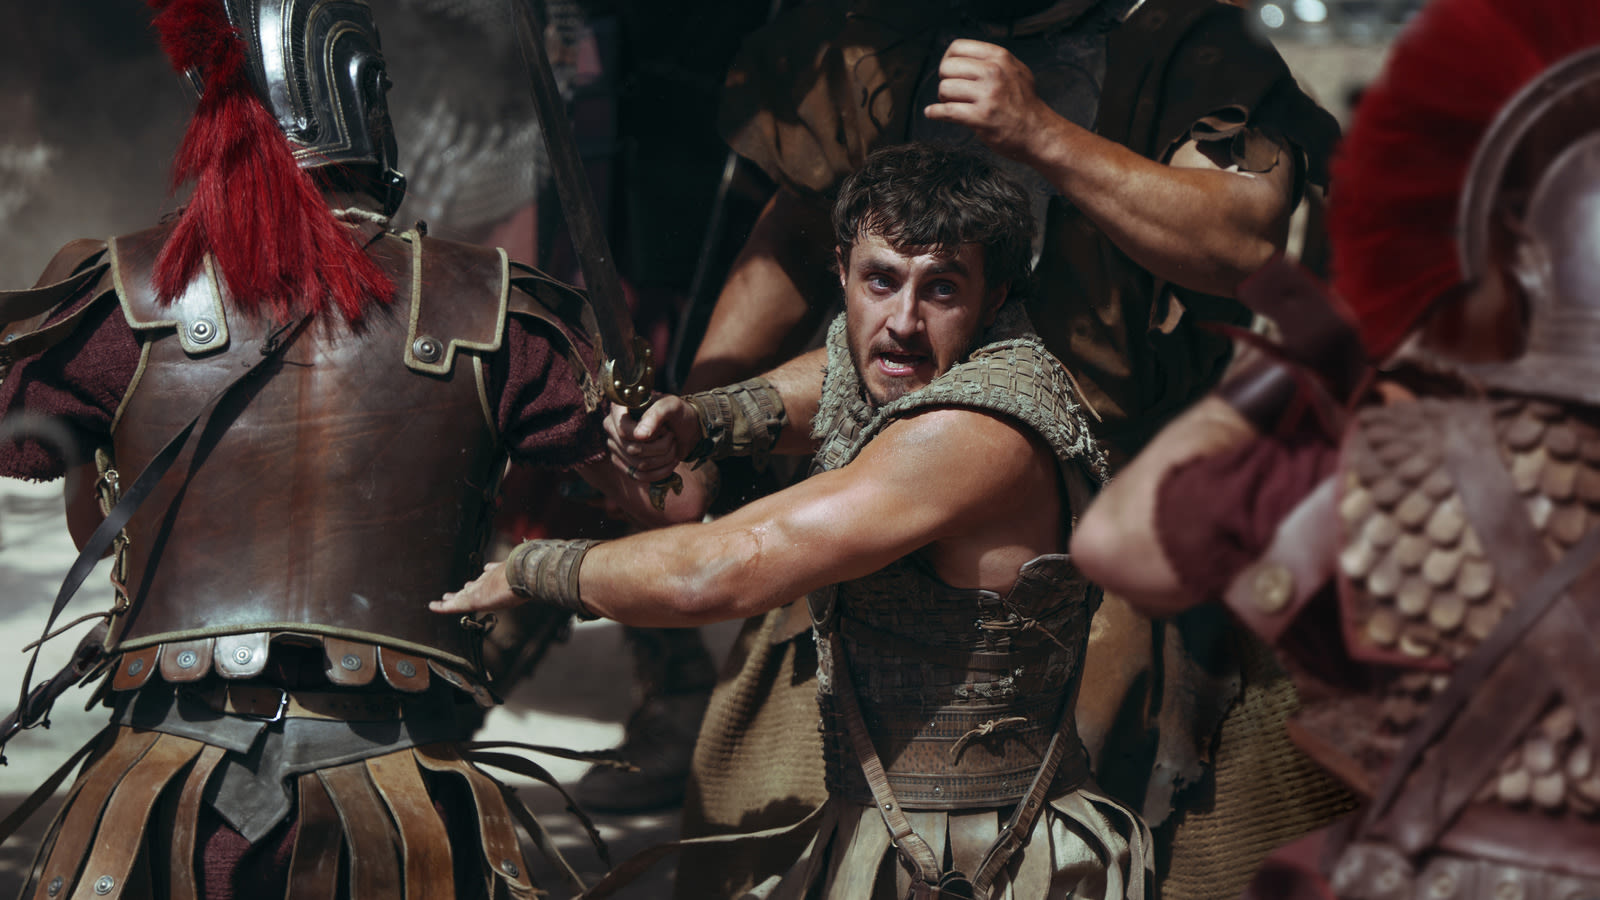 The Gladiator II Trailer's Song Choice Continues An Annoying Hollywood Trend - SlashFilm